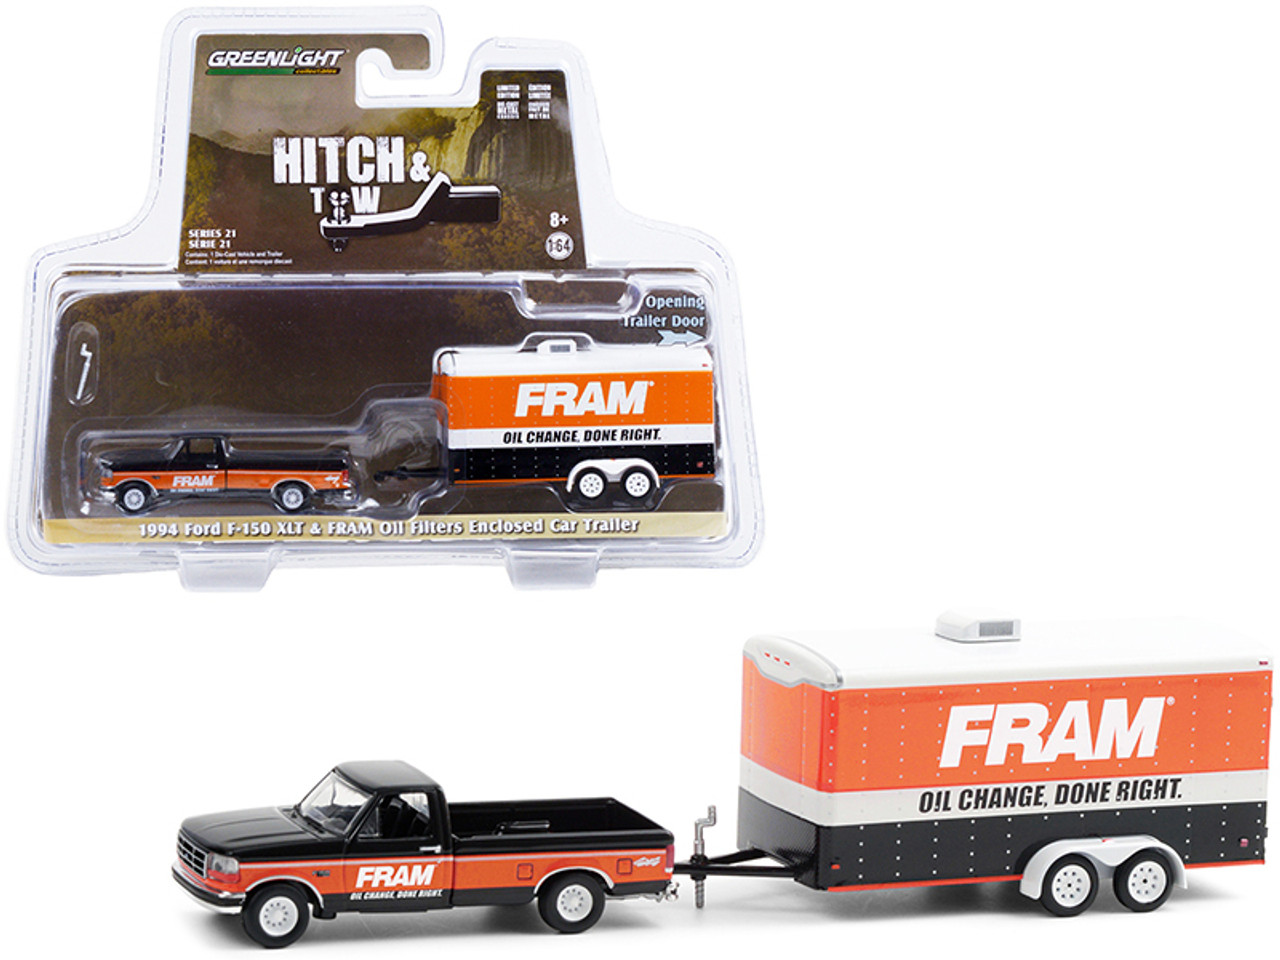 1994 Ford F-150 XLT Pickup Truck Black and Orange with Enclosed Car Hauler "FRAM Oil Filters" "Hitch & Tow" Series 21 1/64 Diecast Model Car by Greenlight